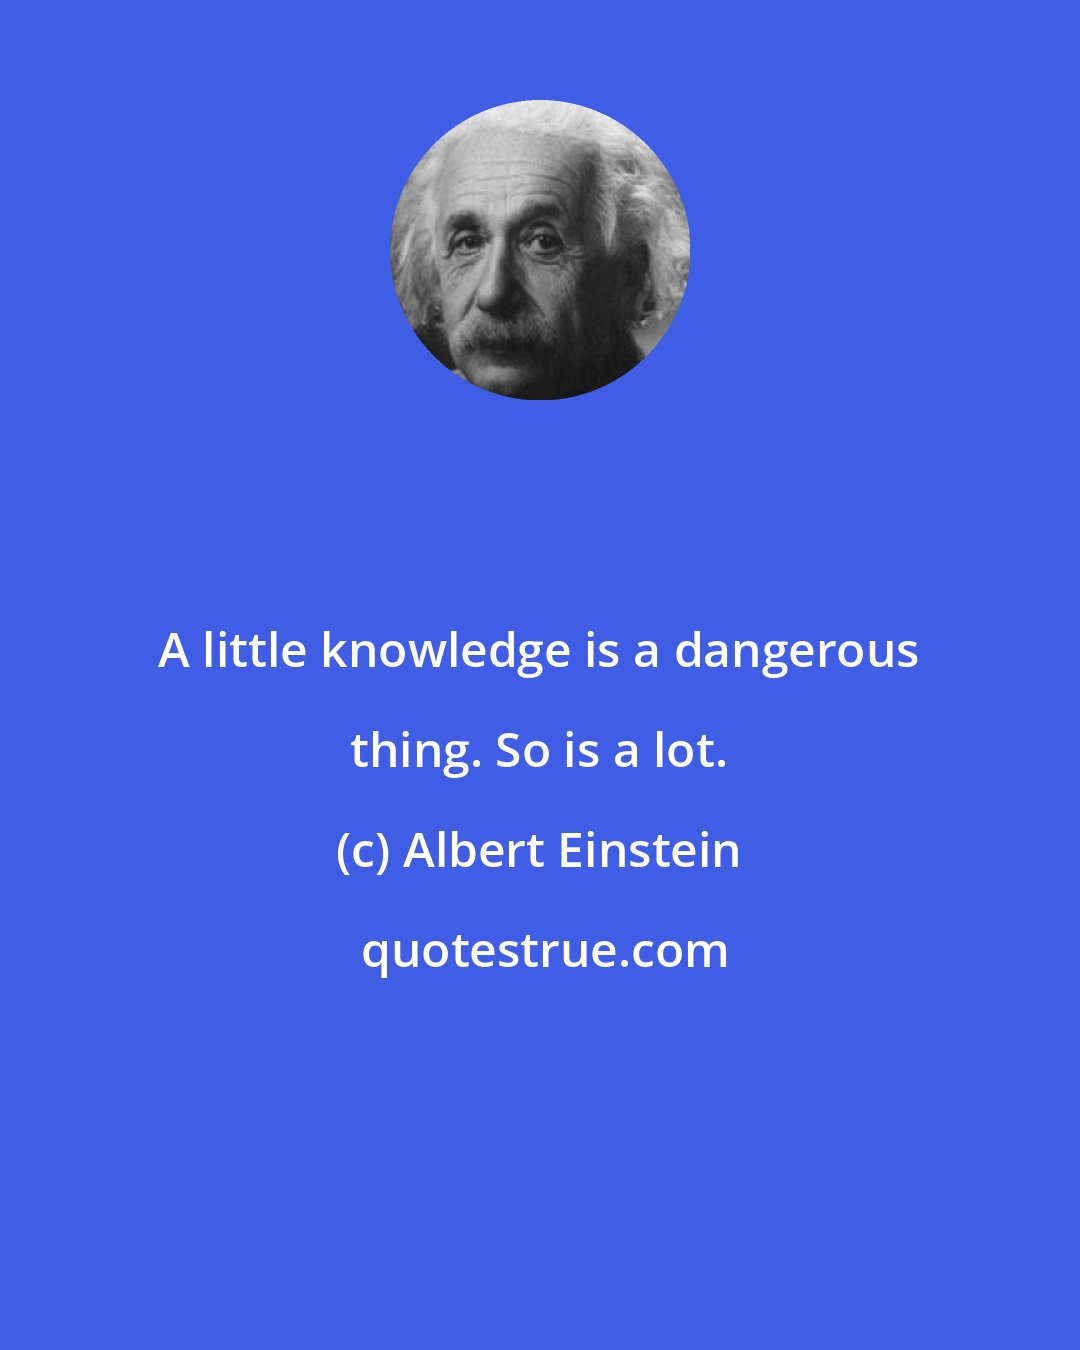 Albert Einstein: A little knowledge is a dangerous thing. So is a lot.